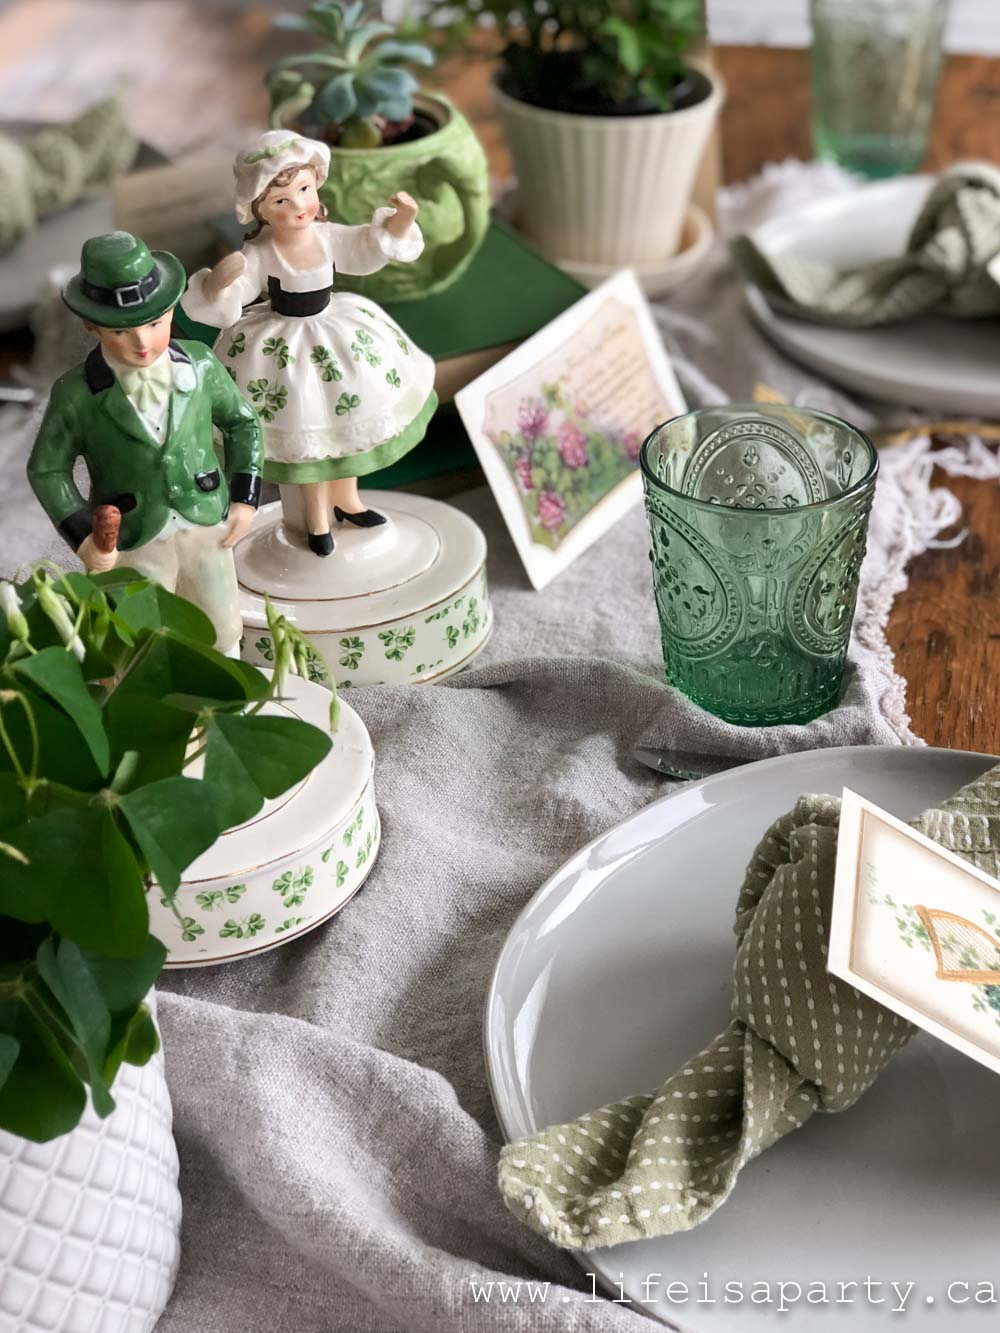 St. Patrick's Day Table: a mix of vintage and modern touches with lots of green for the perfect St. Patrick's Day table decorations.